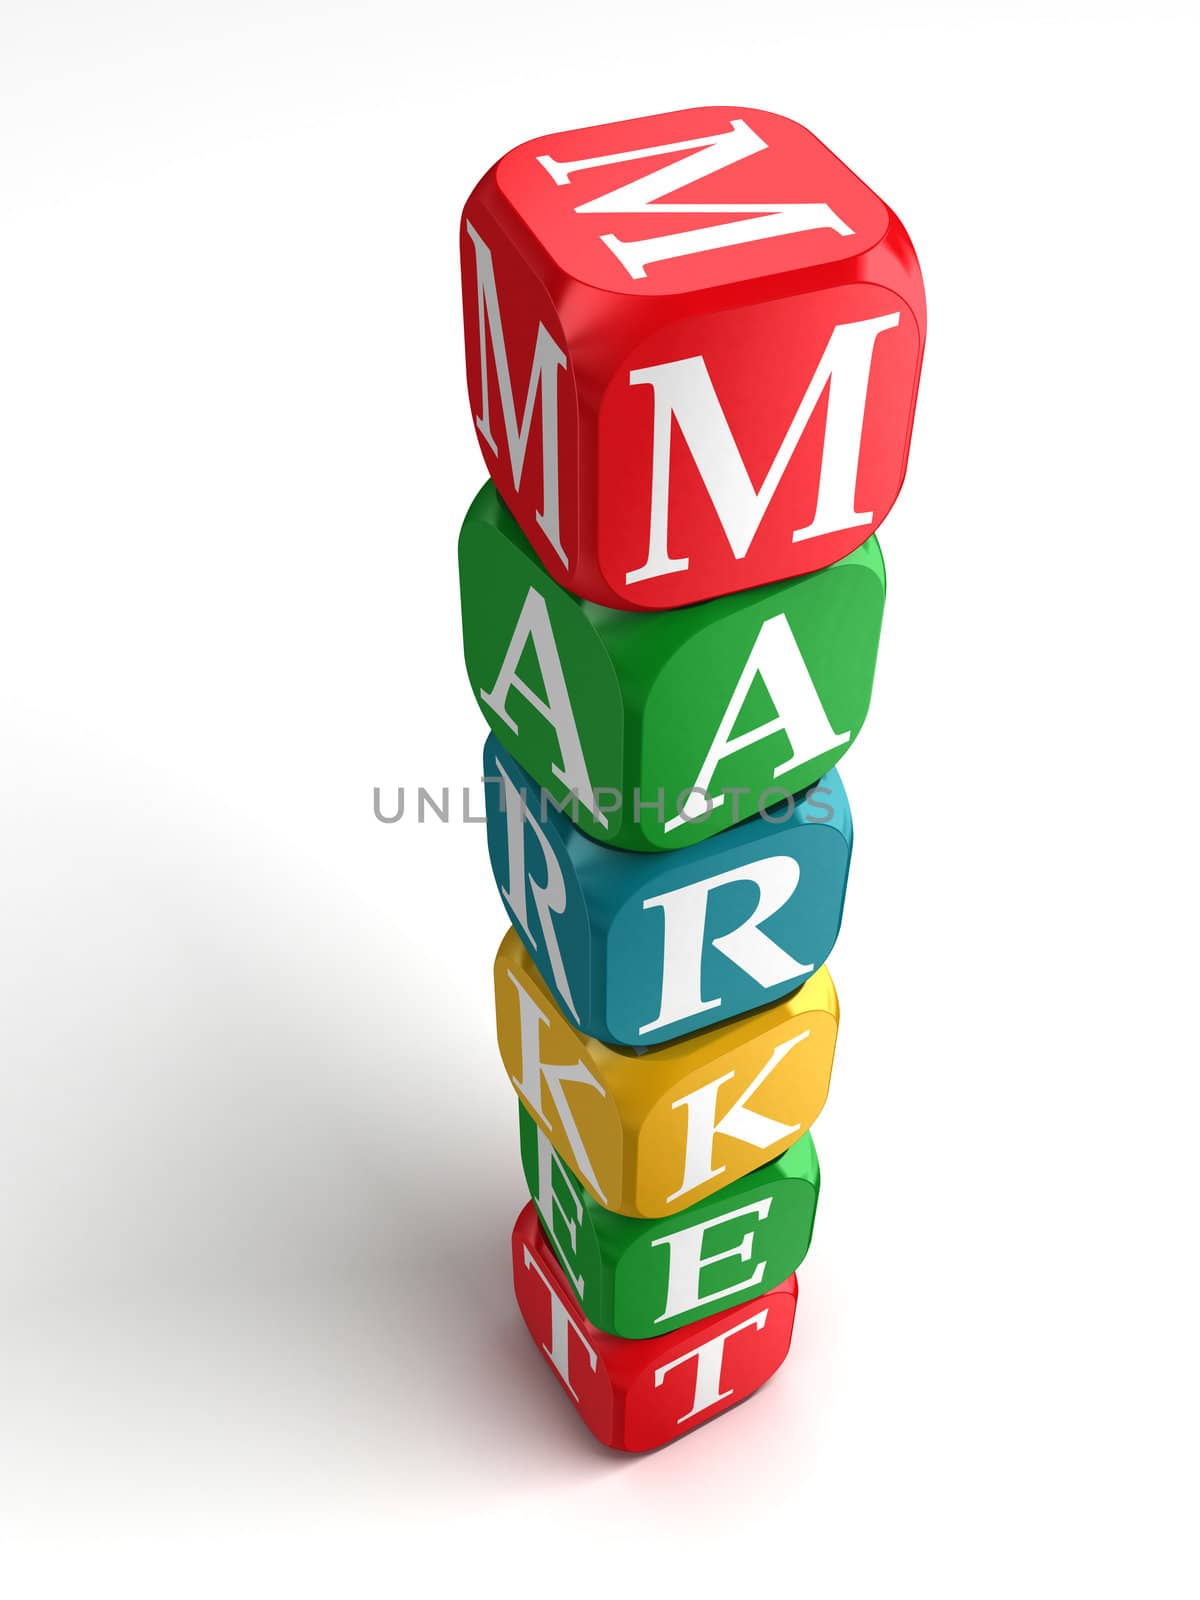 market sign 3d colorful box tower on white background